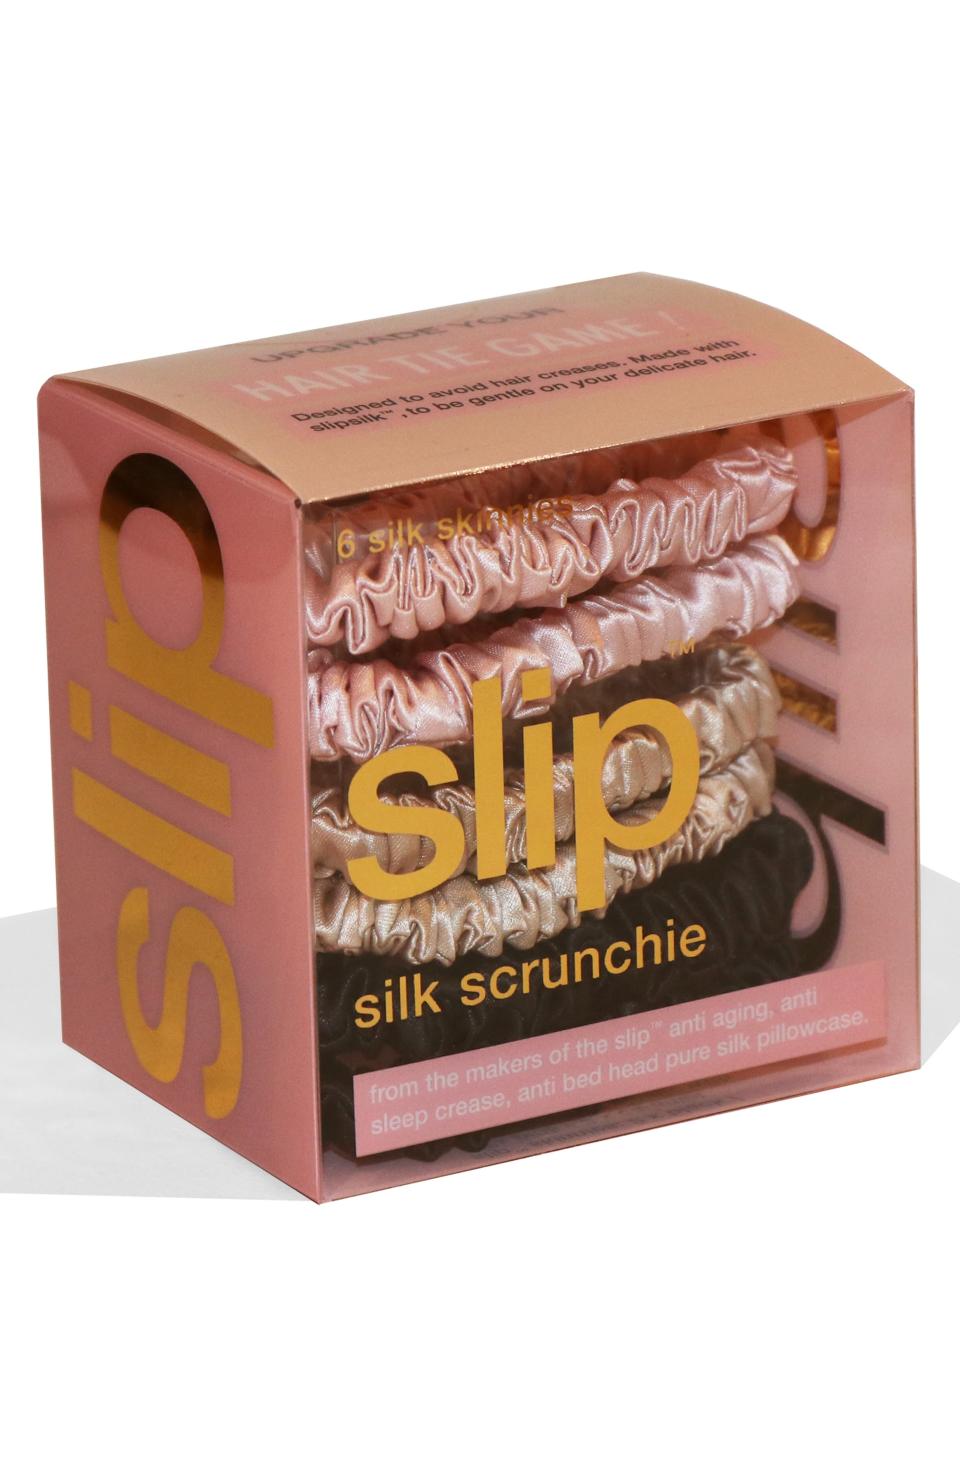 These <a href="https://fave.co/2YxVv3I" target="_blank" rel="noopener noreferrer">silk hair ties</a> will actually be gentle on their hair.&nbsp;